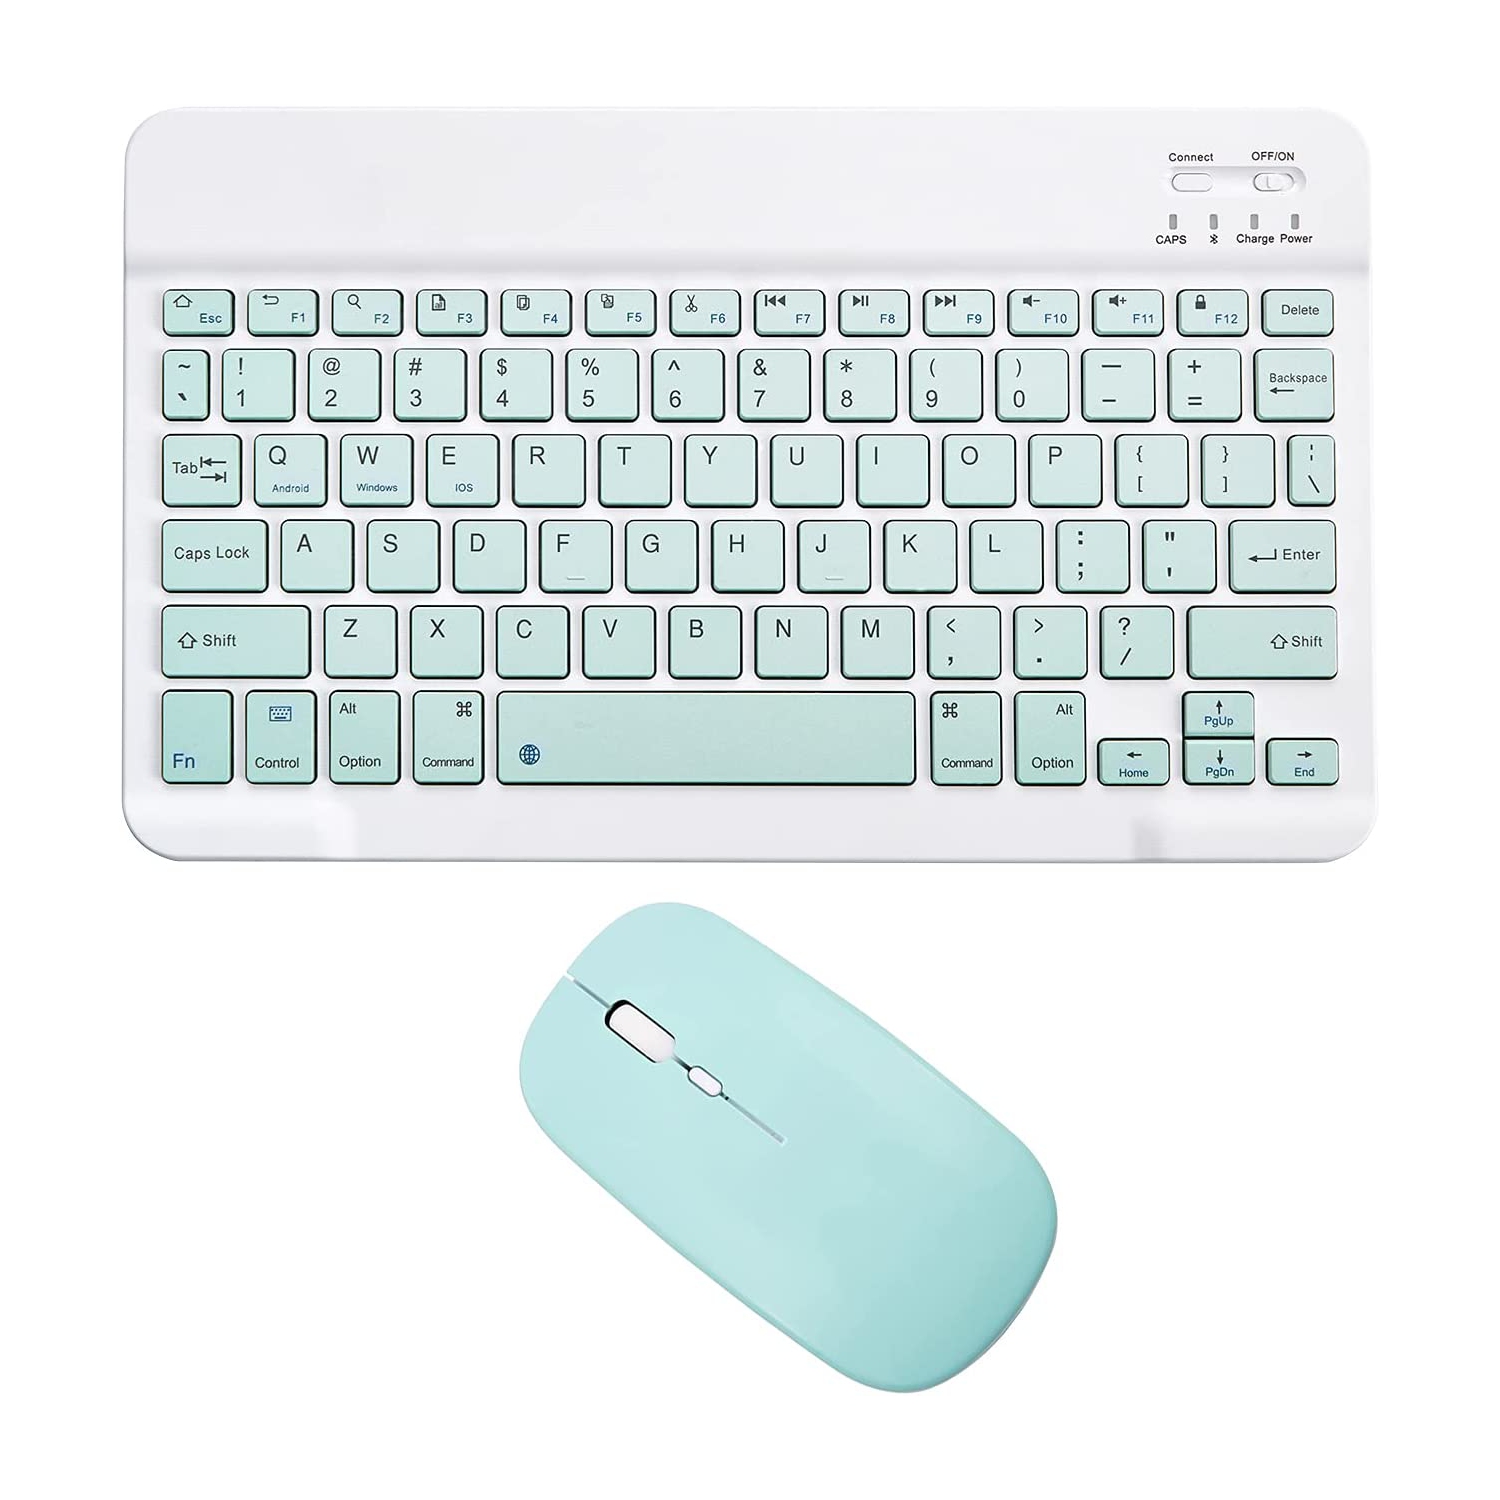 Rechargeable Bluetooth Keyboard and Mouse Combo Ultra-Slim Portable Compact Wireless Mouse Keyboard Set for Android Windows Tablet Cell Phone iPhone iPad Pro Air Mini, iPad OS/iOS